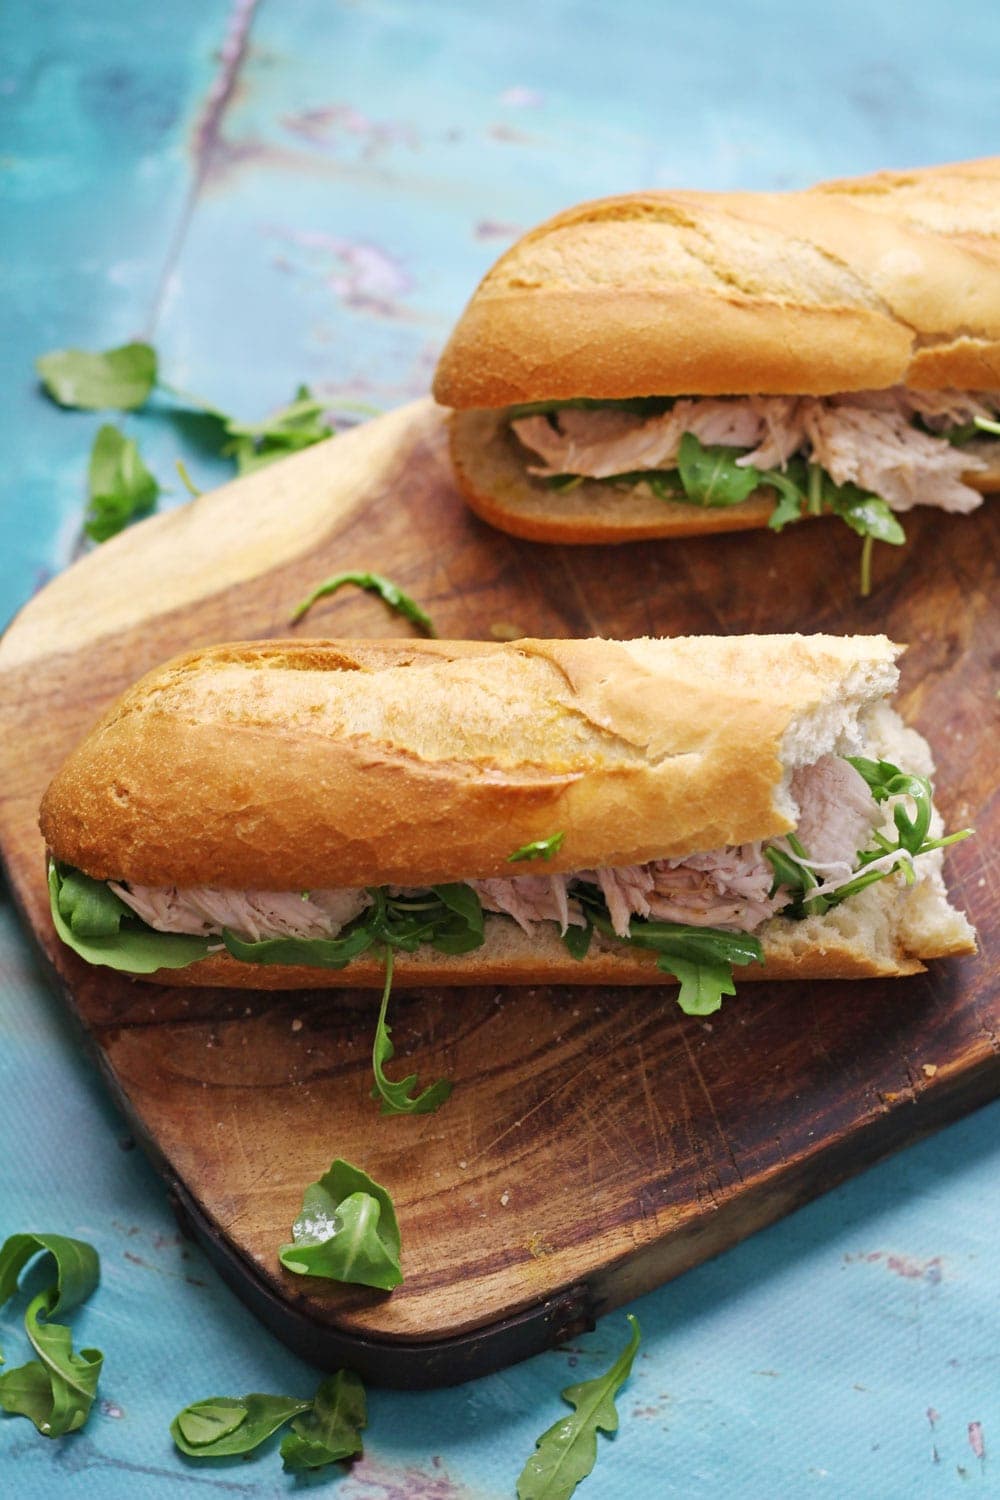 This lime & mint roast chicken sandwich recipe is a delicious weekend treat! Serve drizzled with garlic butter and topped with peppery rocket leaves.